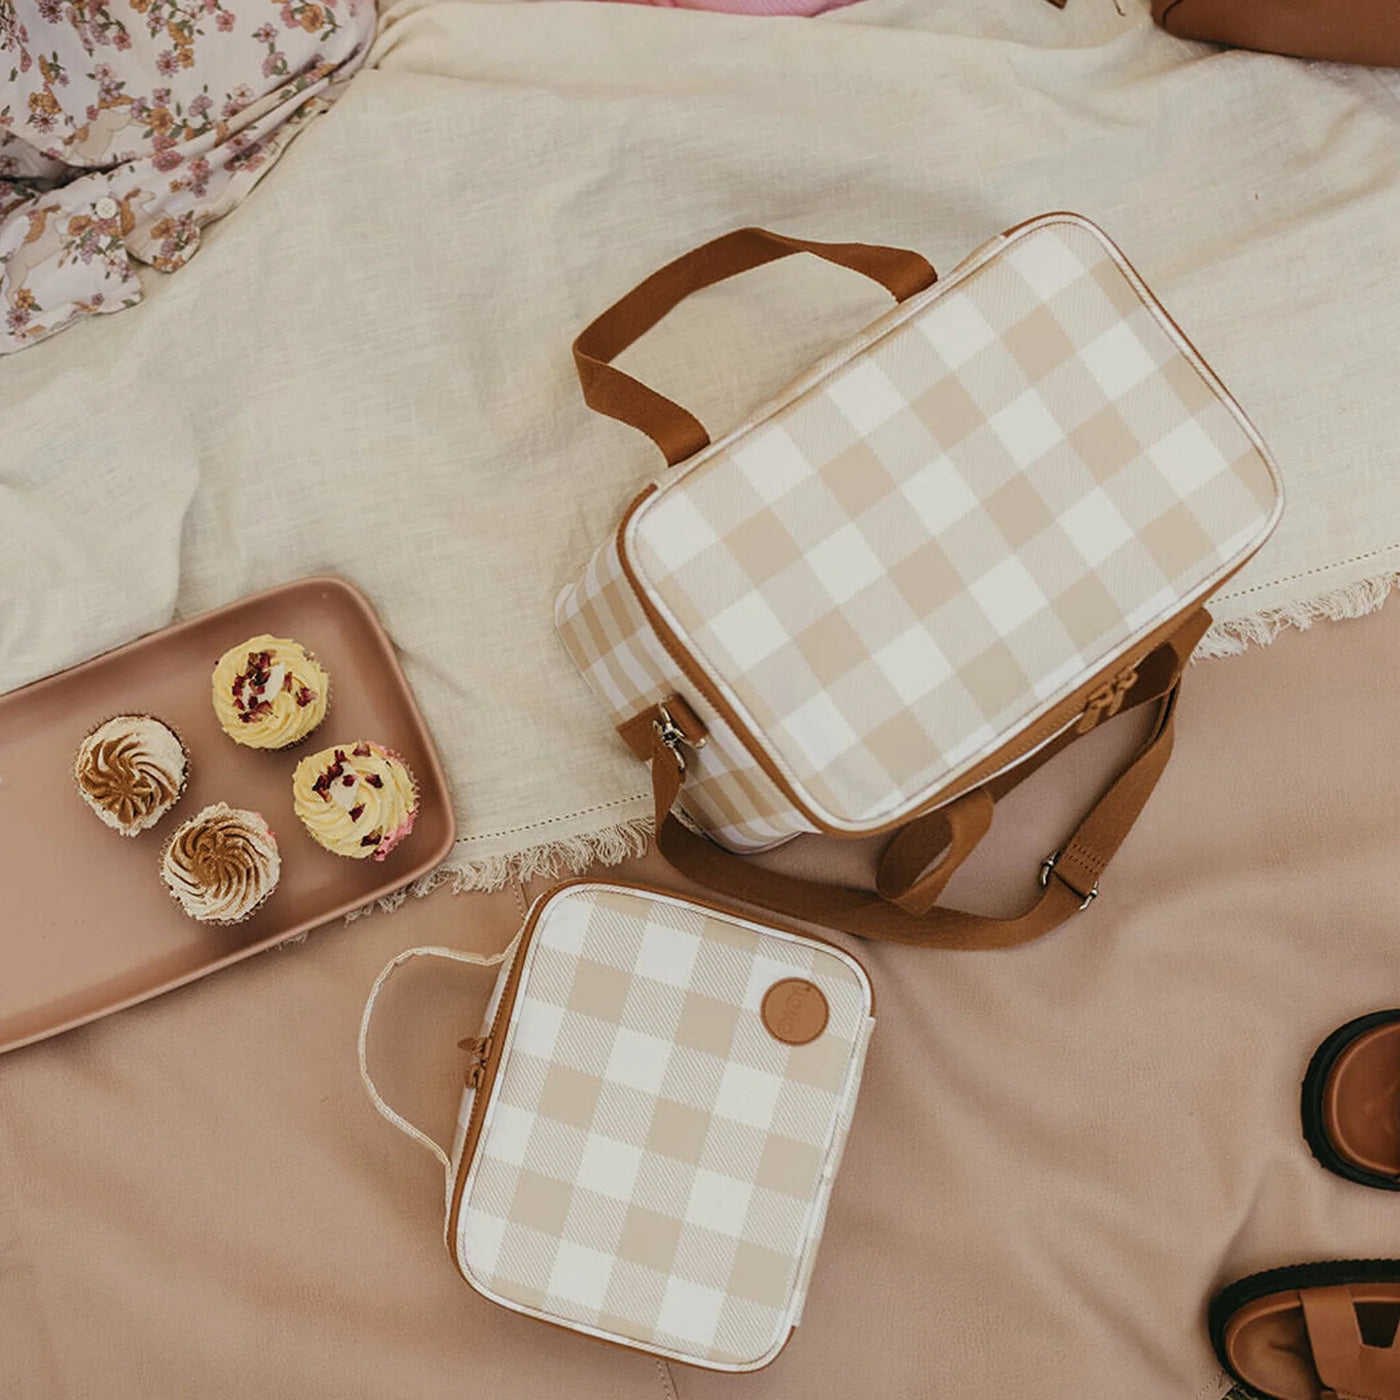 OiOi Mini Insulated Lunch Bag - Beige Gingham Mealtime OiOi 